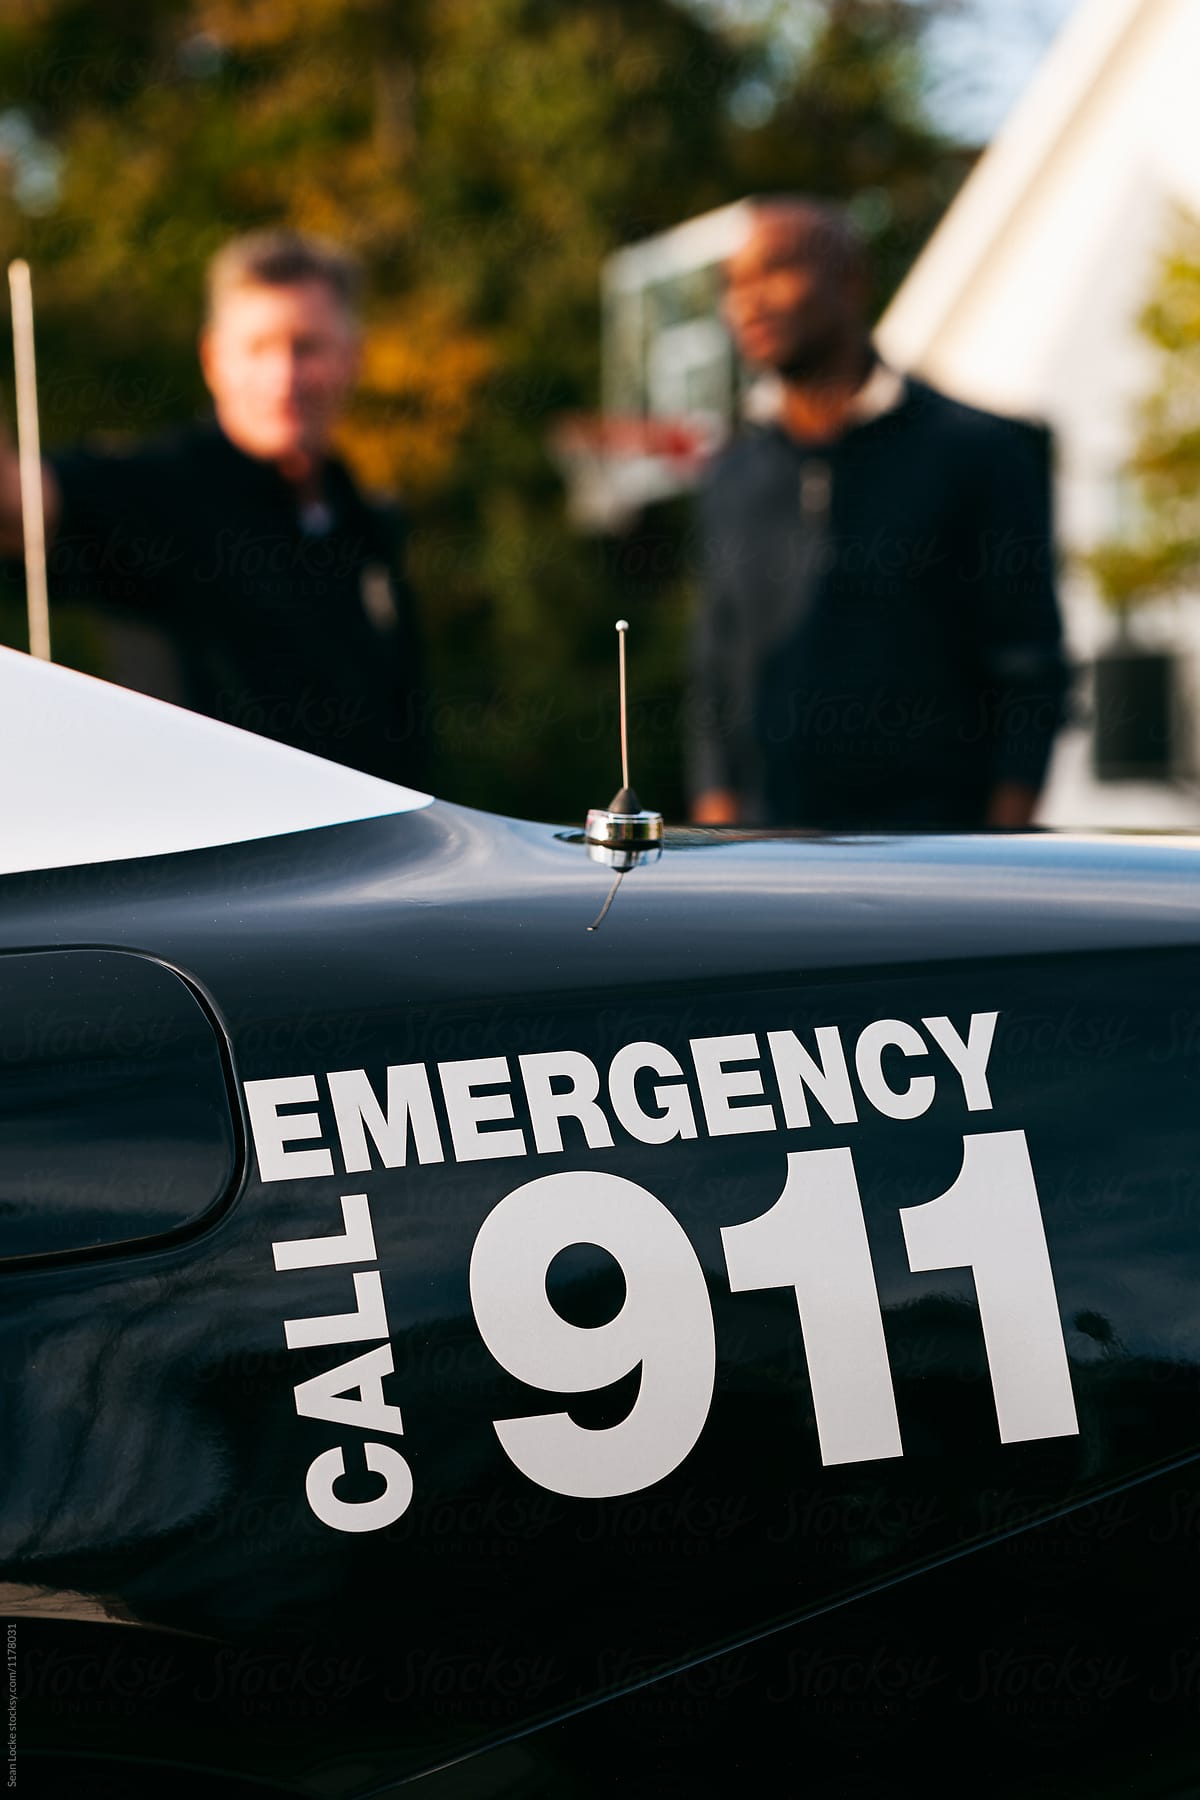 Police: Focus On 911 Car Label As a Person Talks With Officer